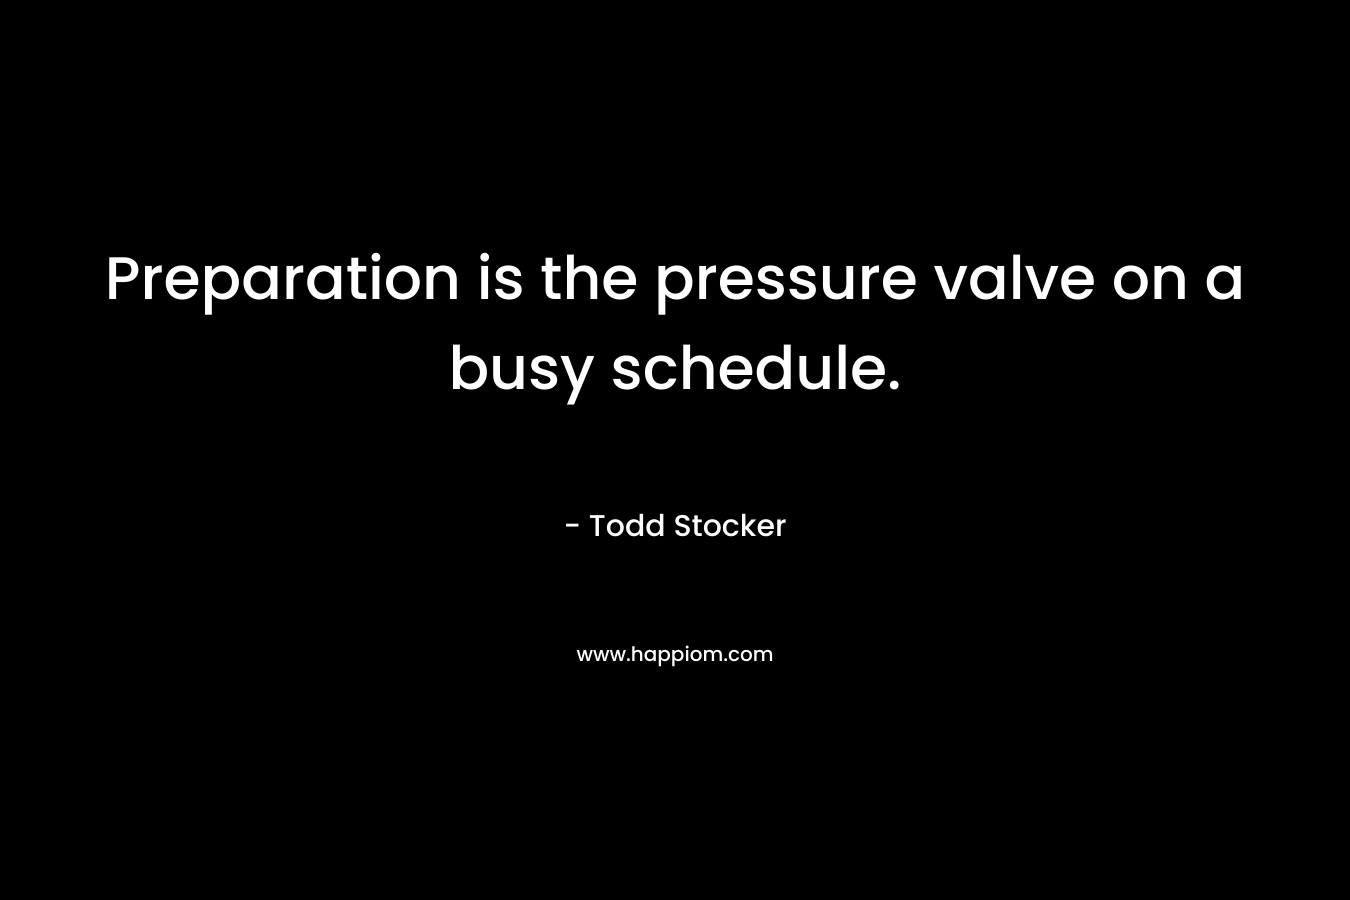 Preparation is the pressure valve on a busy schedule.